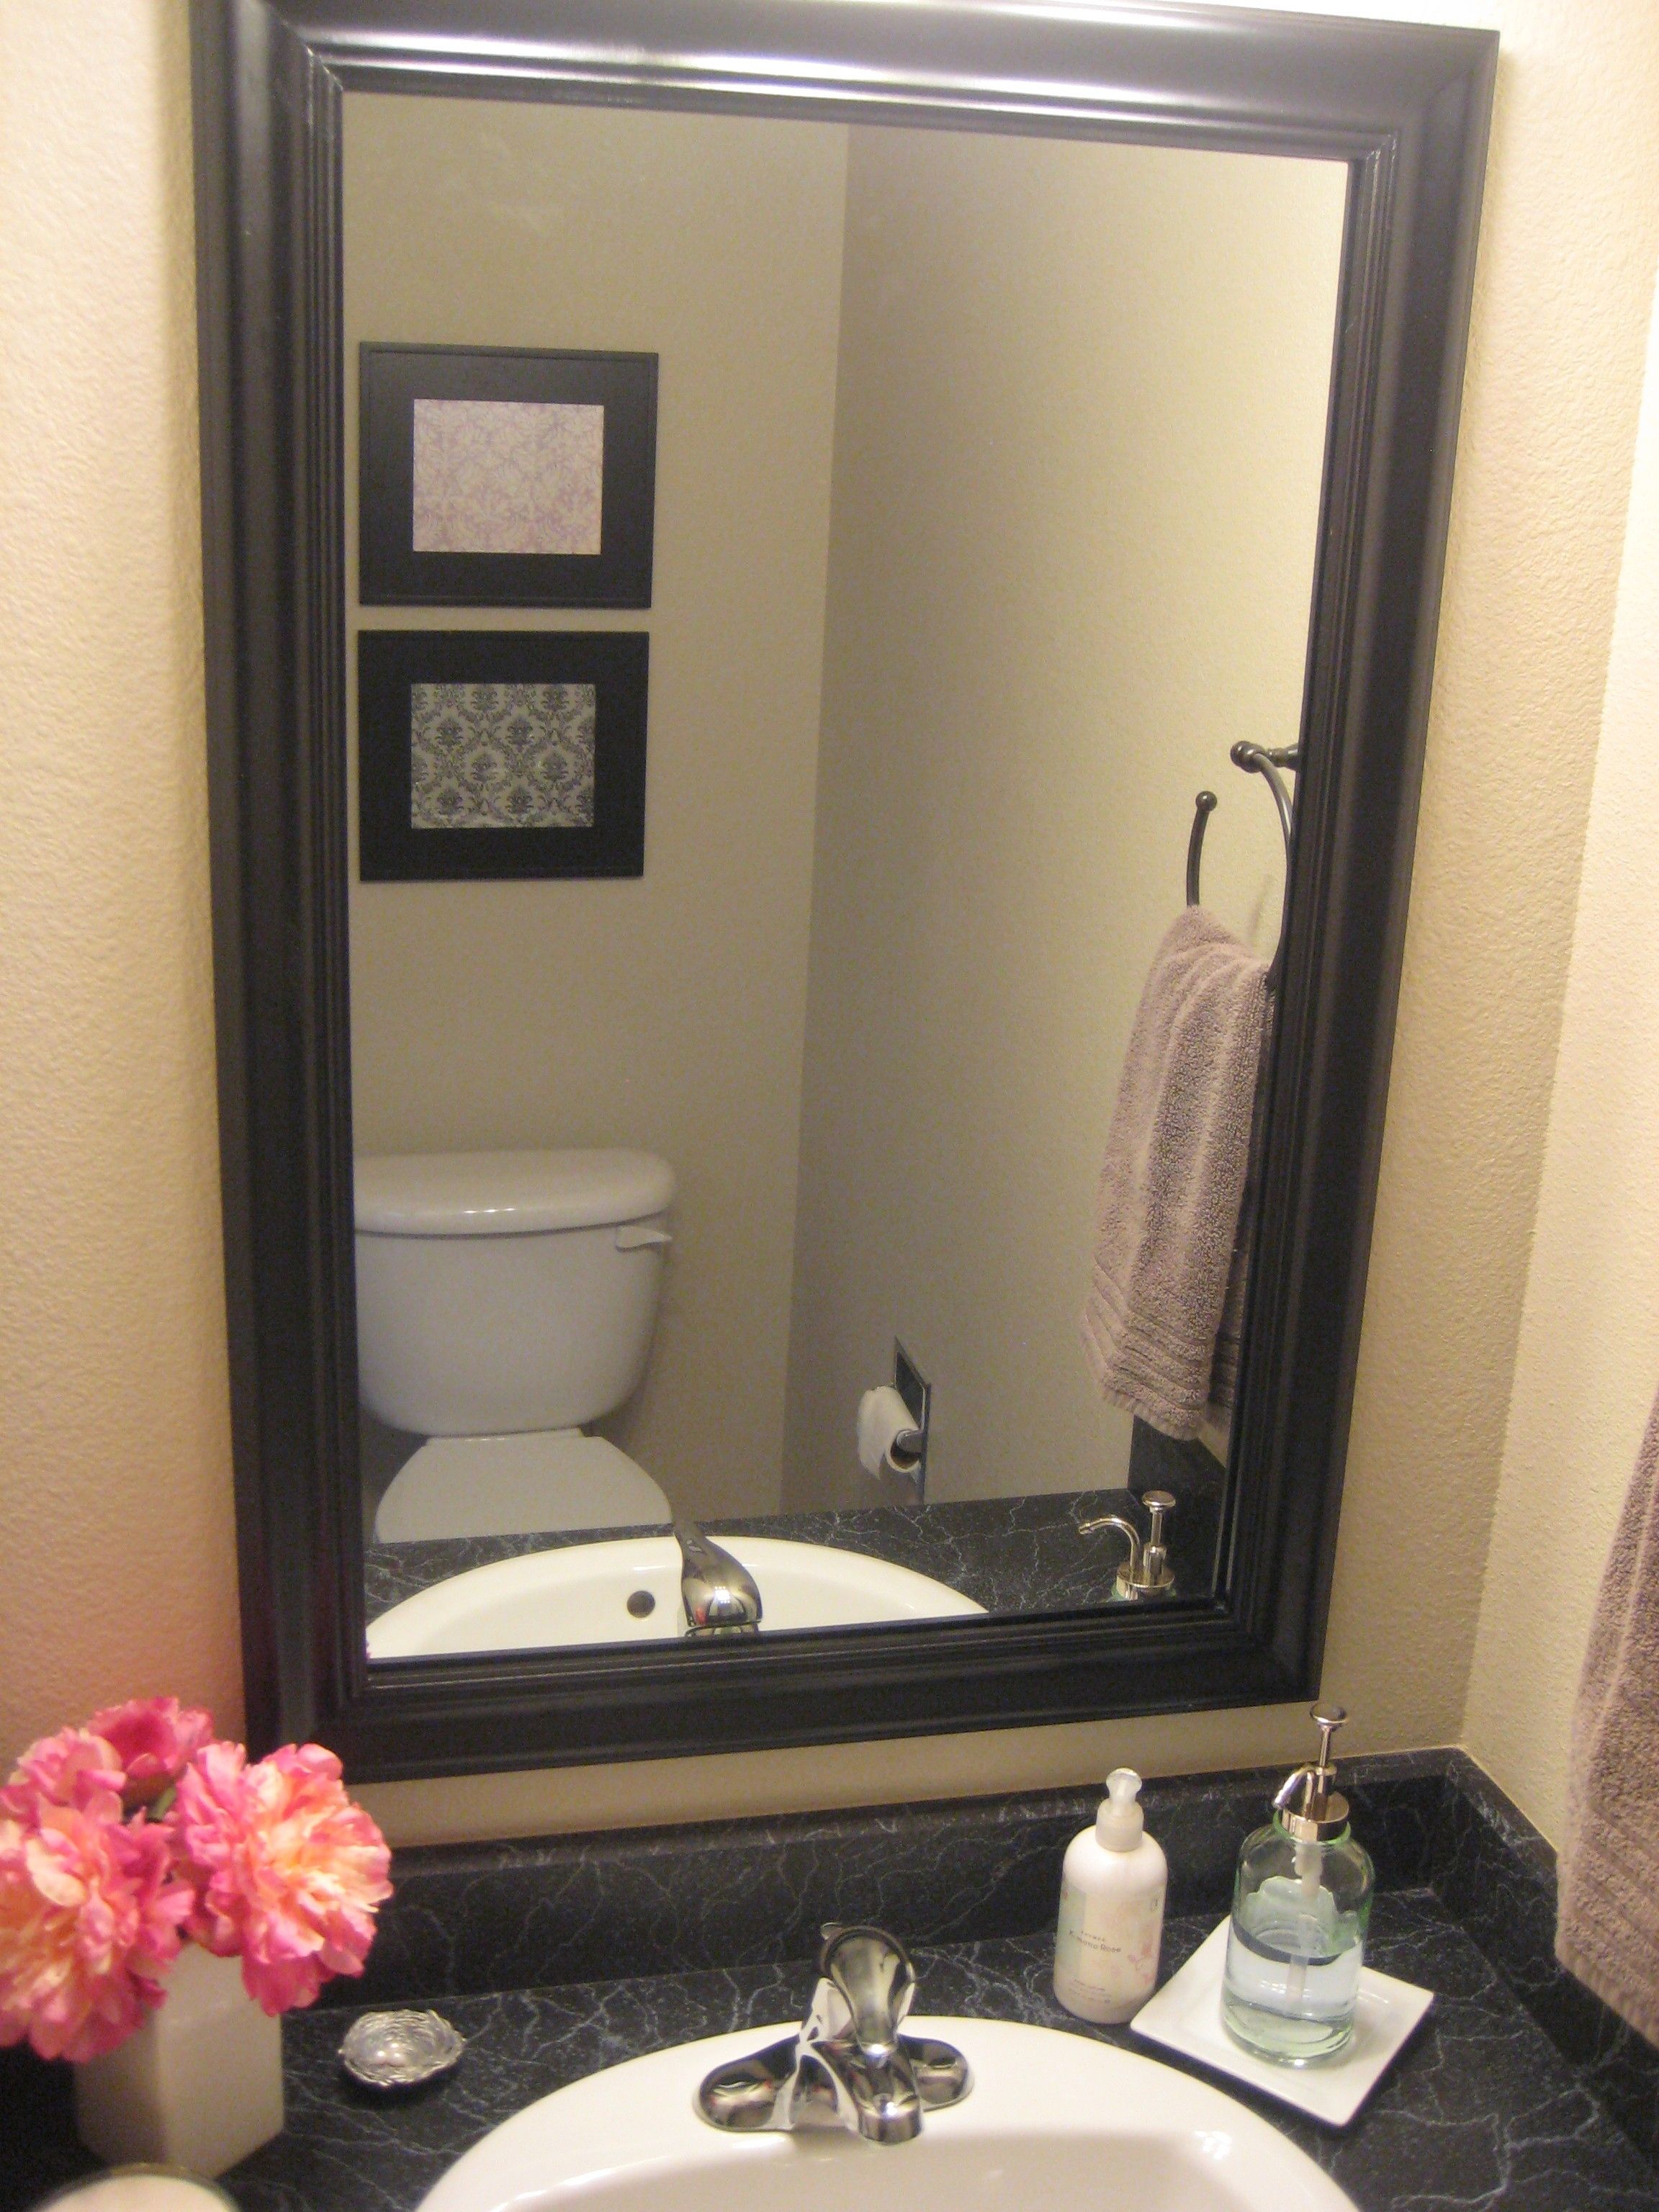 Inspirational Bathroom Wall To Wall Mirrors 78 About Remodel With Bathroom Wall To Wall Mirrors Pertaining To Cream Wall Mirror (View 11 of 15)